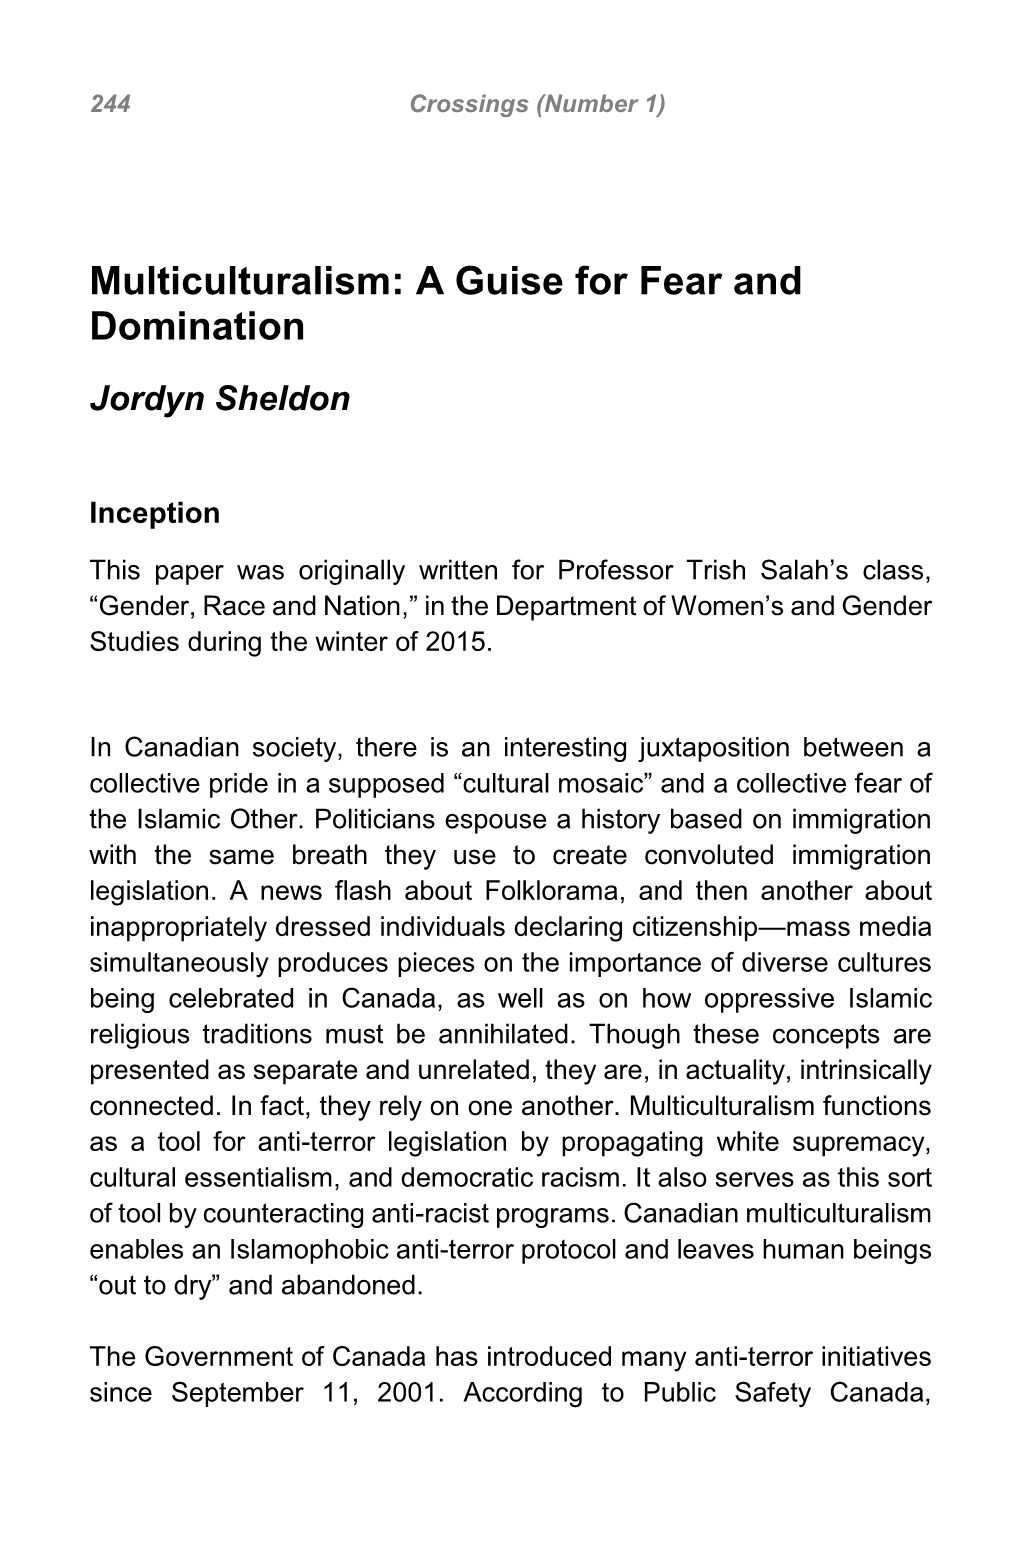 Multiculturalism: a Guise for Fear and Domination